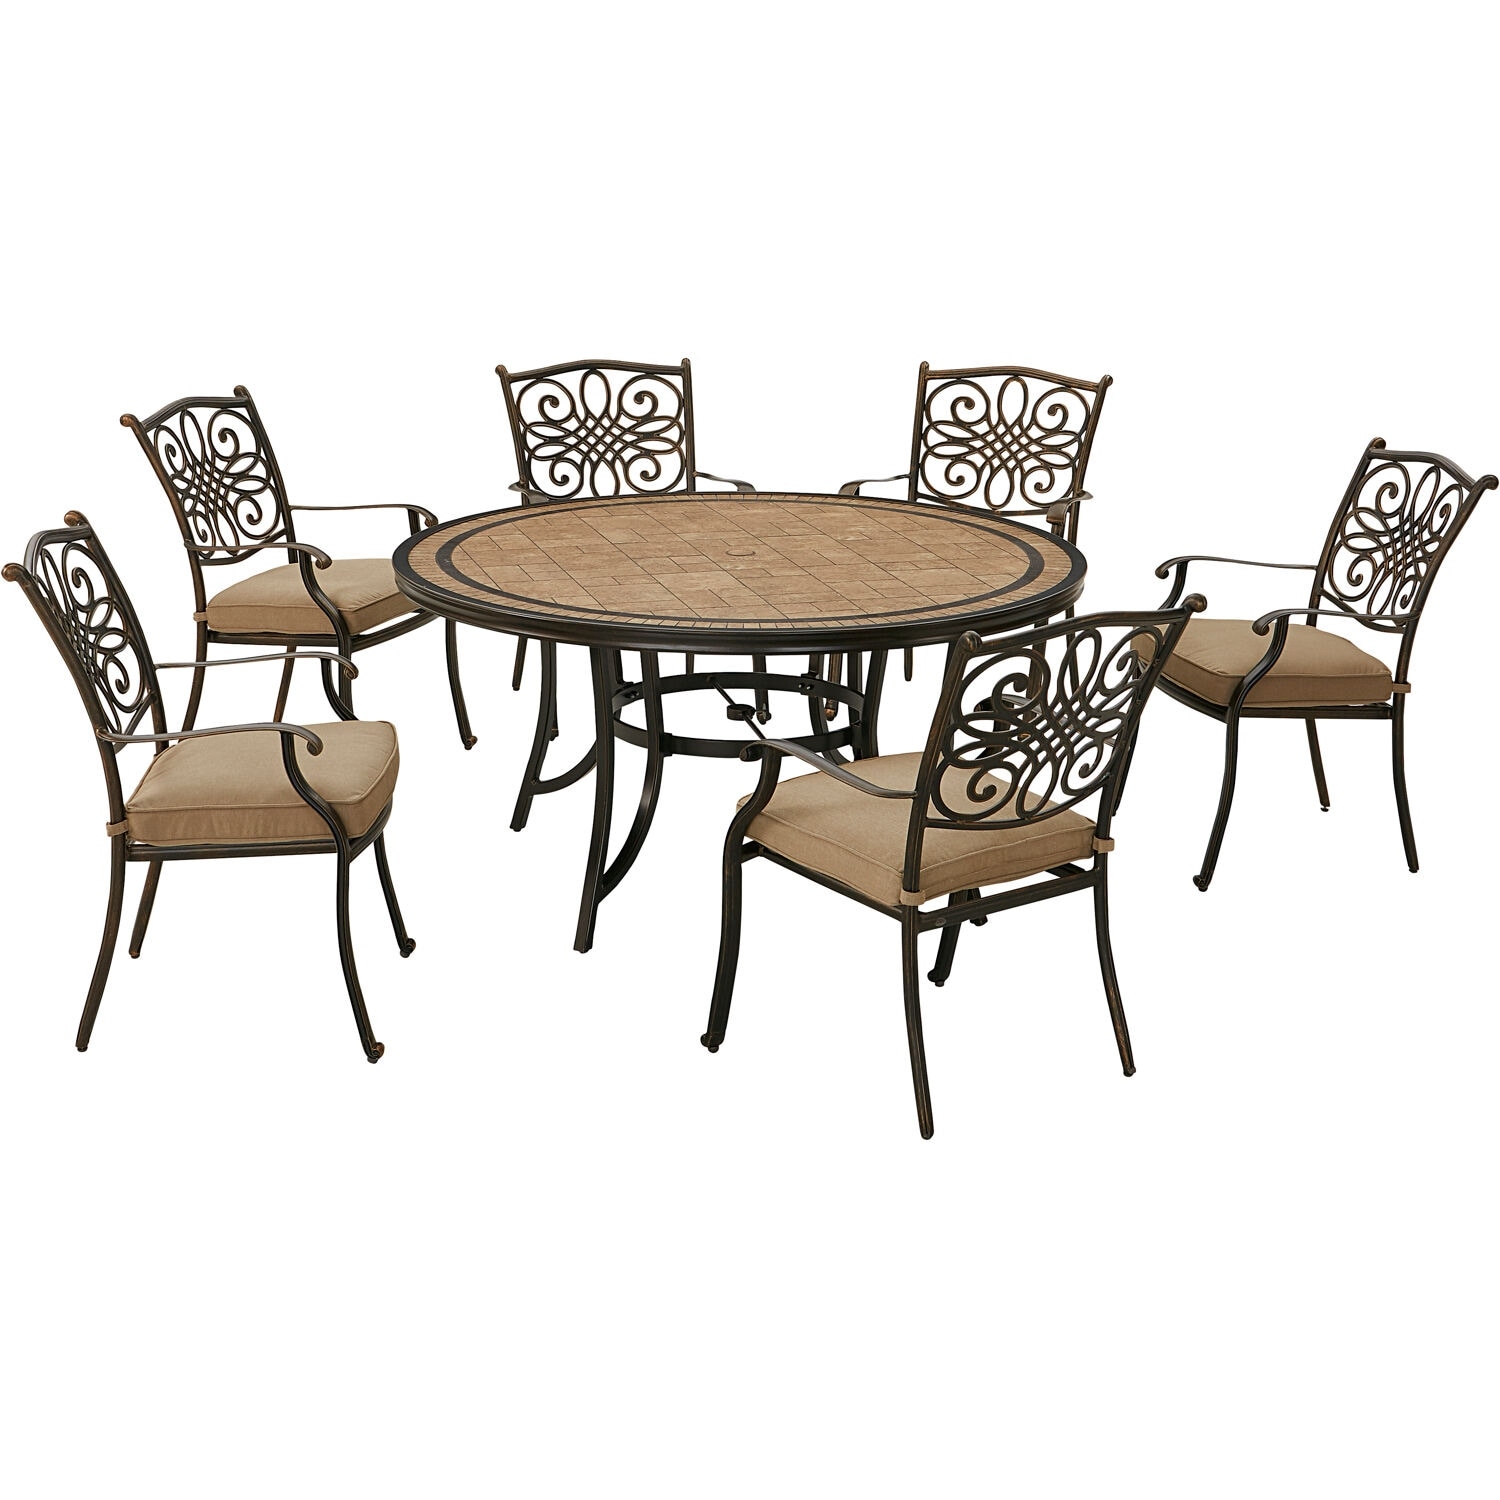 Hanover Monaco 7-piece Dining Set In Tan With Six Dining Chairs And A 60-in. Tile-top Table